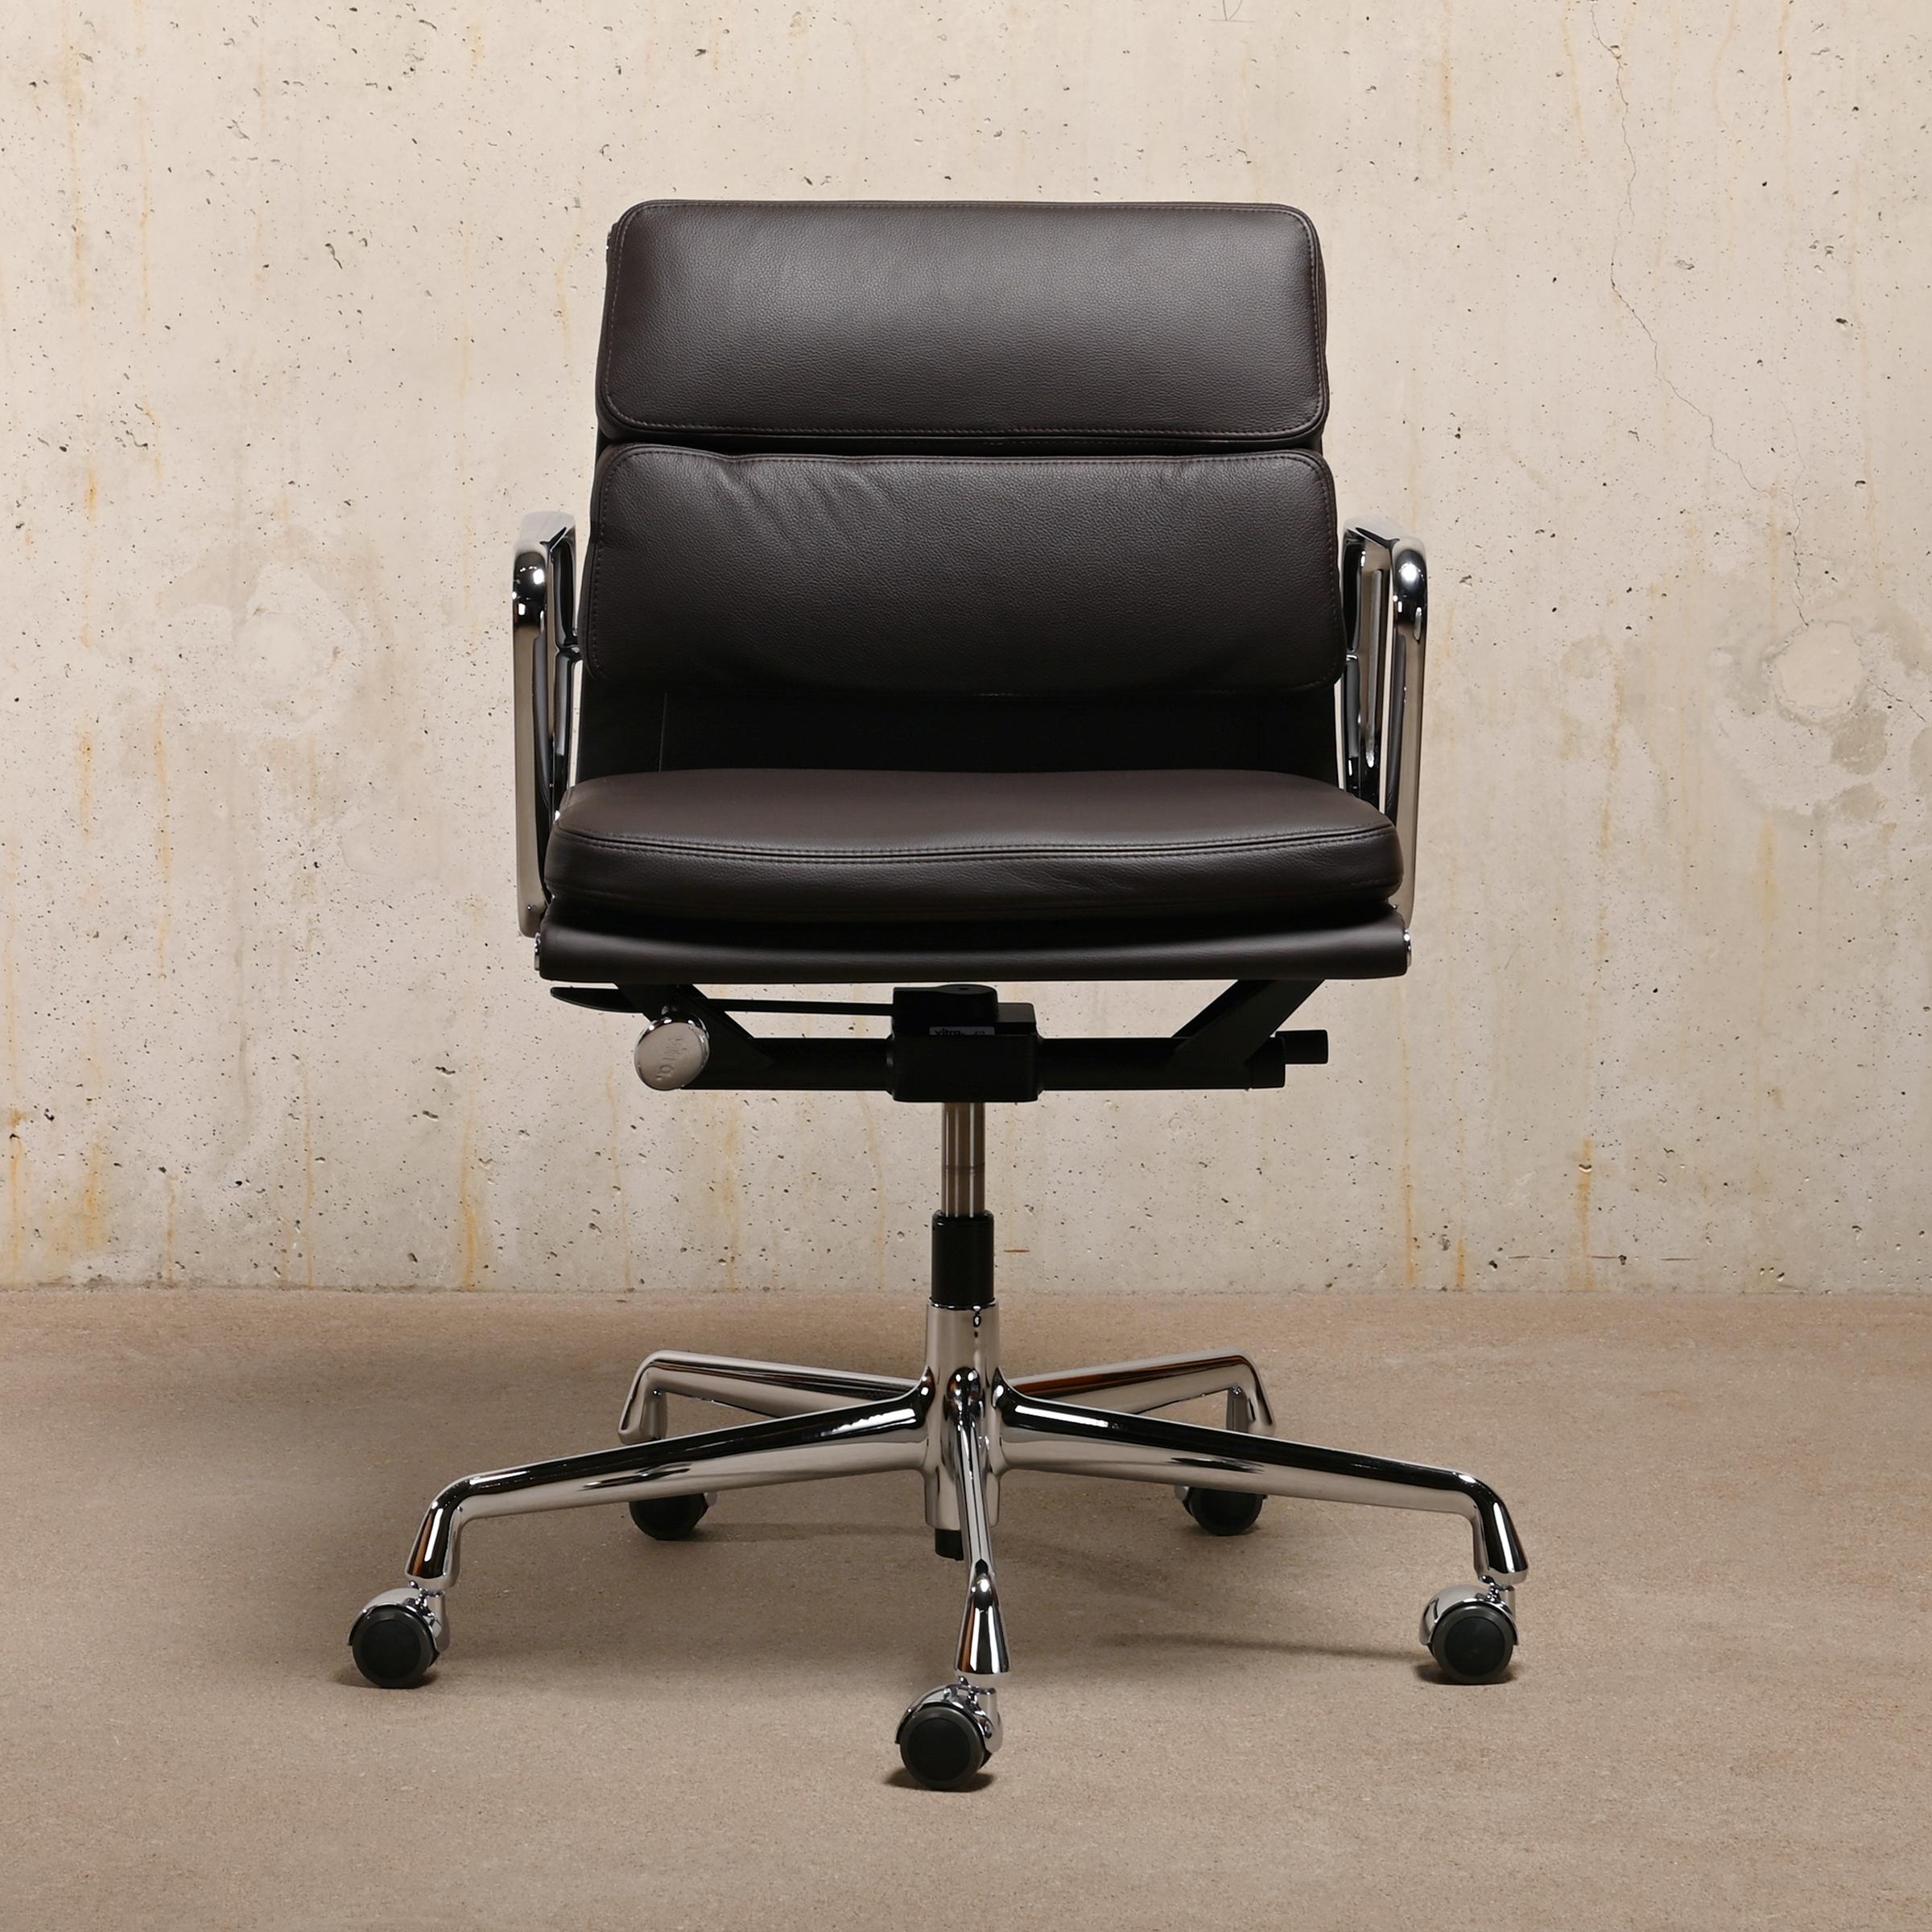 Beautiful new office chair EA217 belonging to the iconic Aluminium Series designed by Charles & Ray Eames for Herman Miller (US) / Vitra (EU). Exceptional comfort is guaranteed with the cushions in soft leather, height adjustment and tilt/swivel